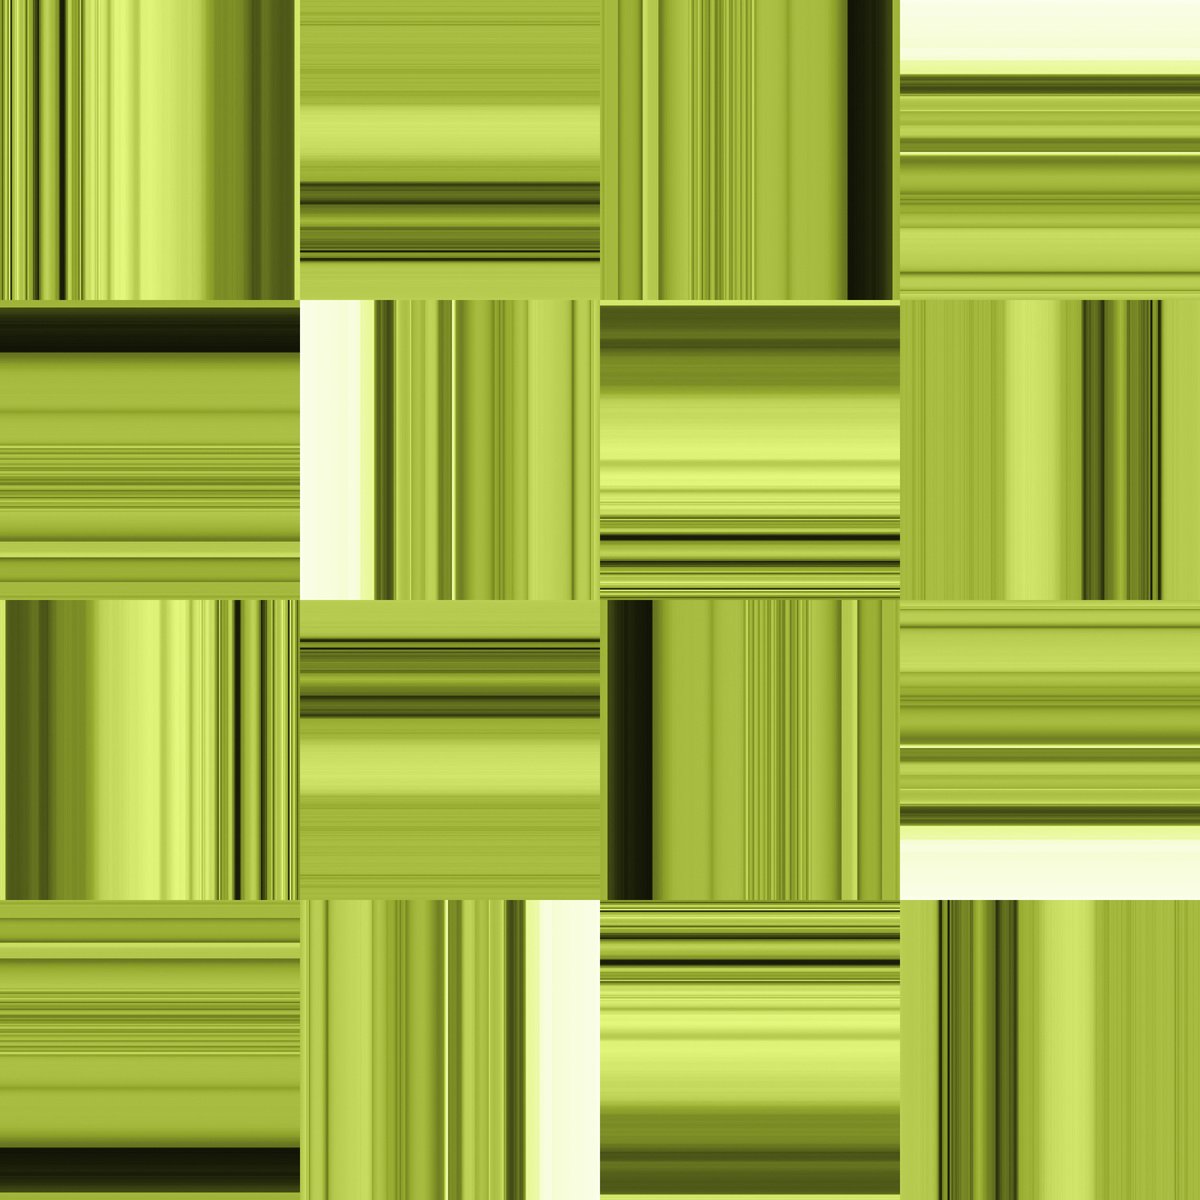 green, vertical squares, with only slightly visible ones